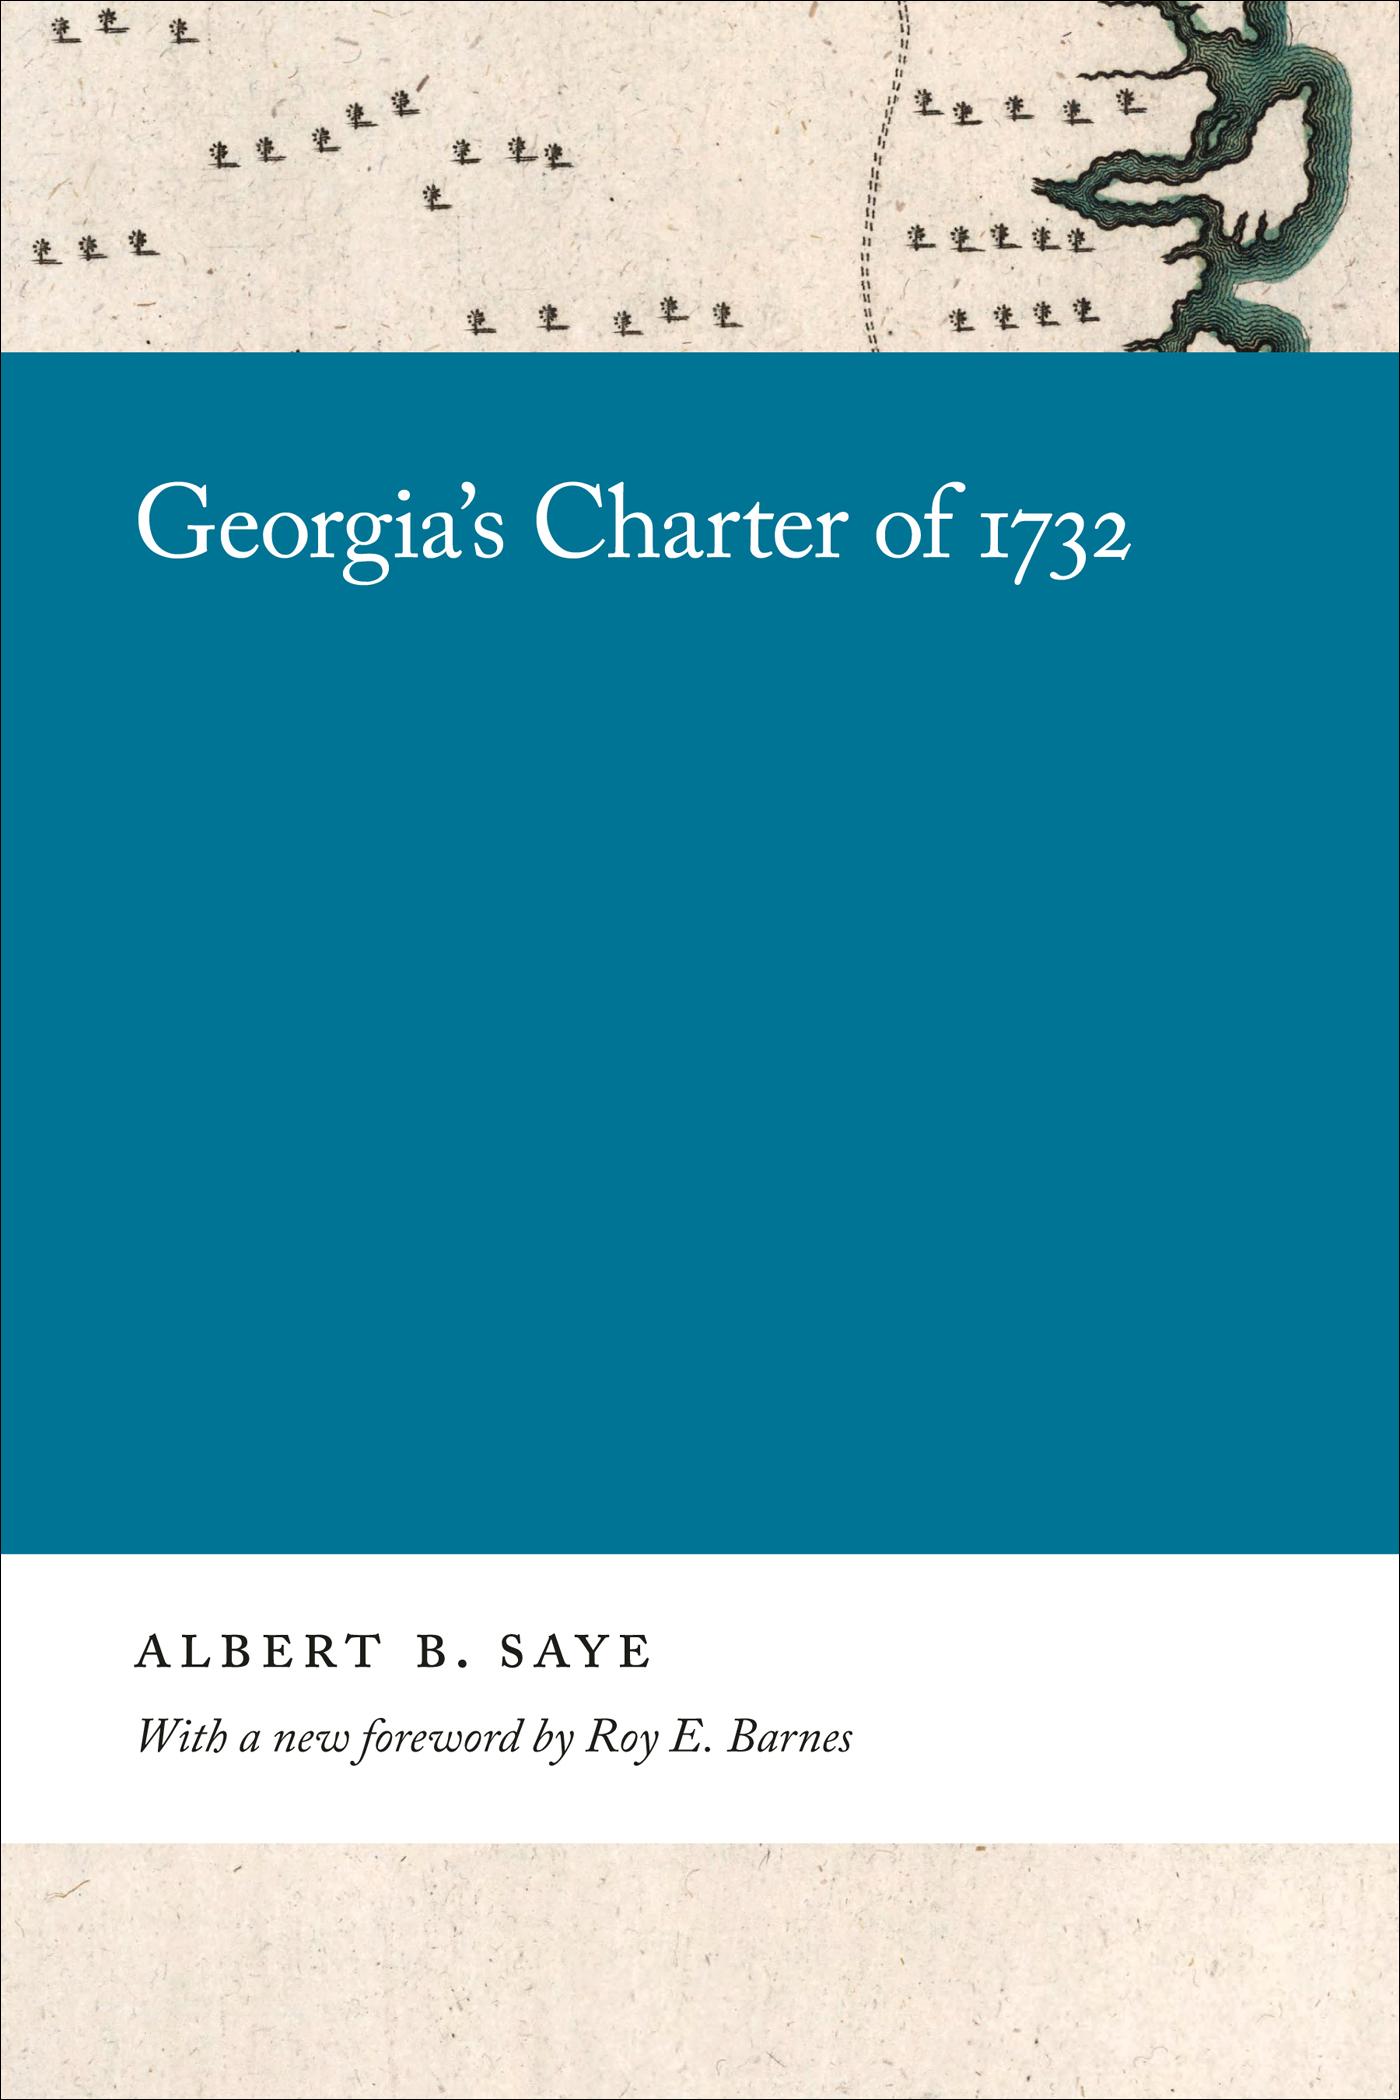 Cover page of the book “Georgia’ Charter of 1732.”